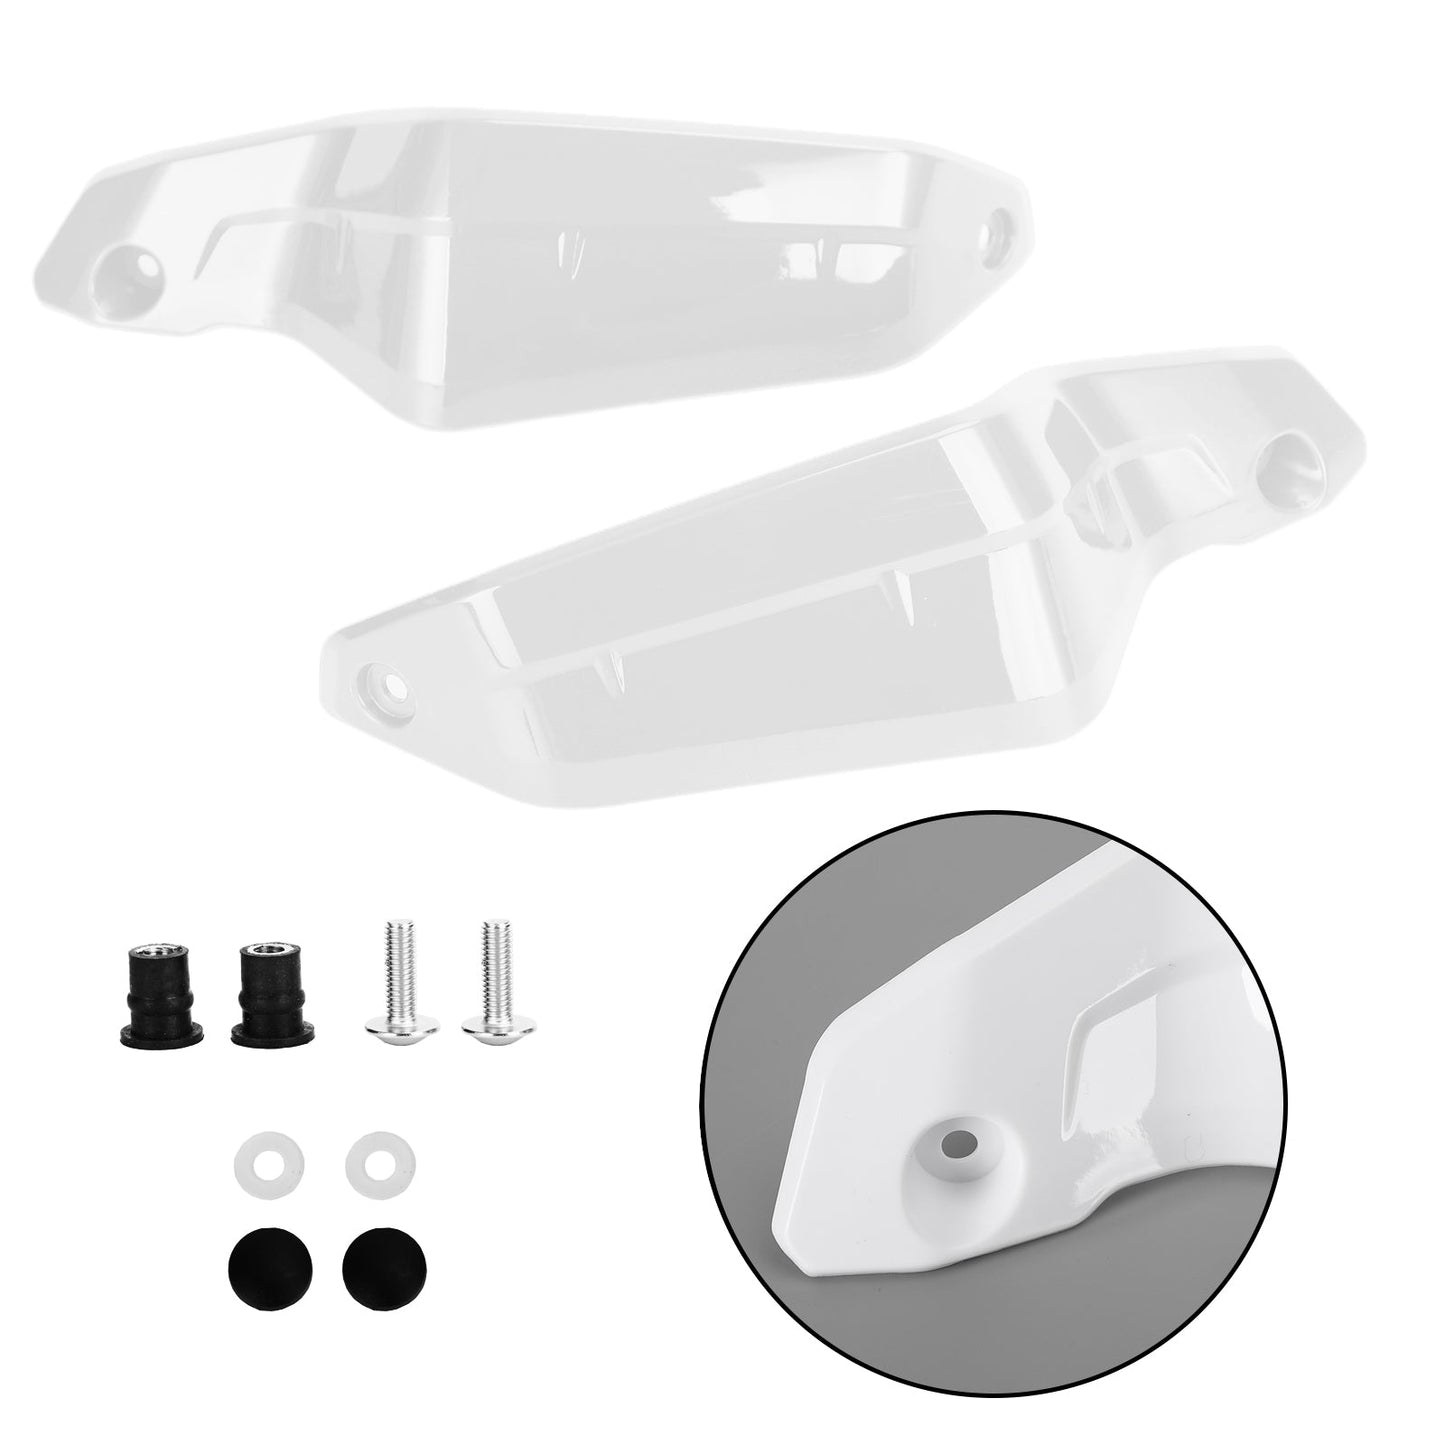 Handguard Extensions Hand Protector fit for Honda CRF1100L /ADV X-ADV750 2021